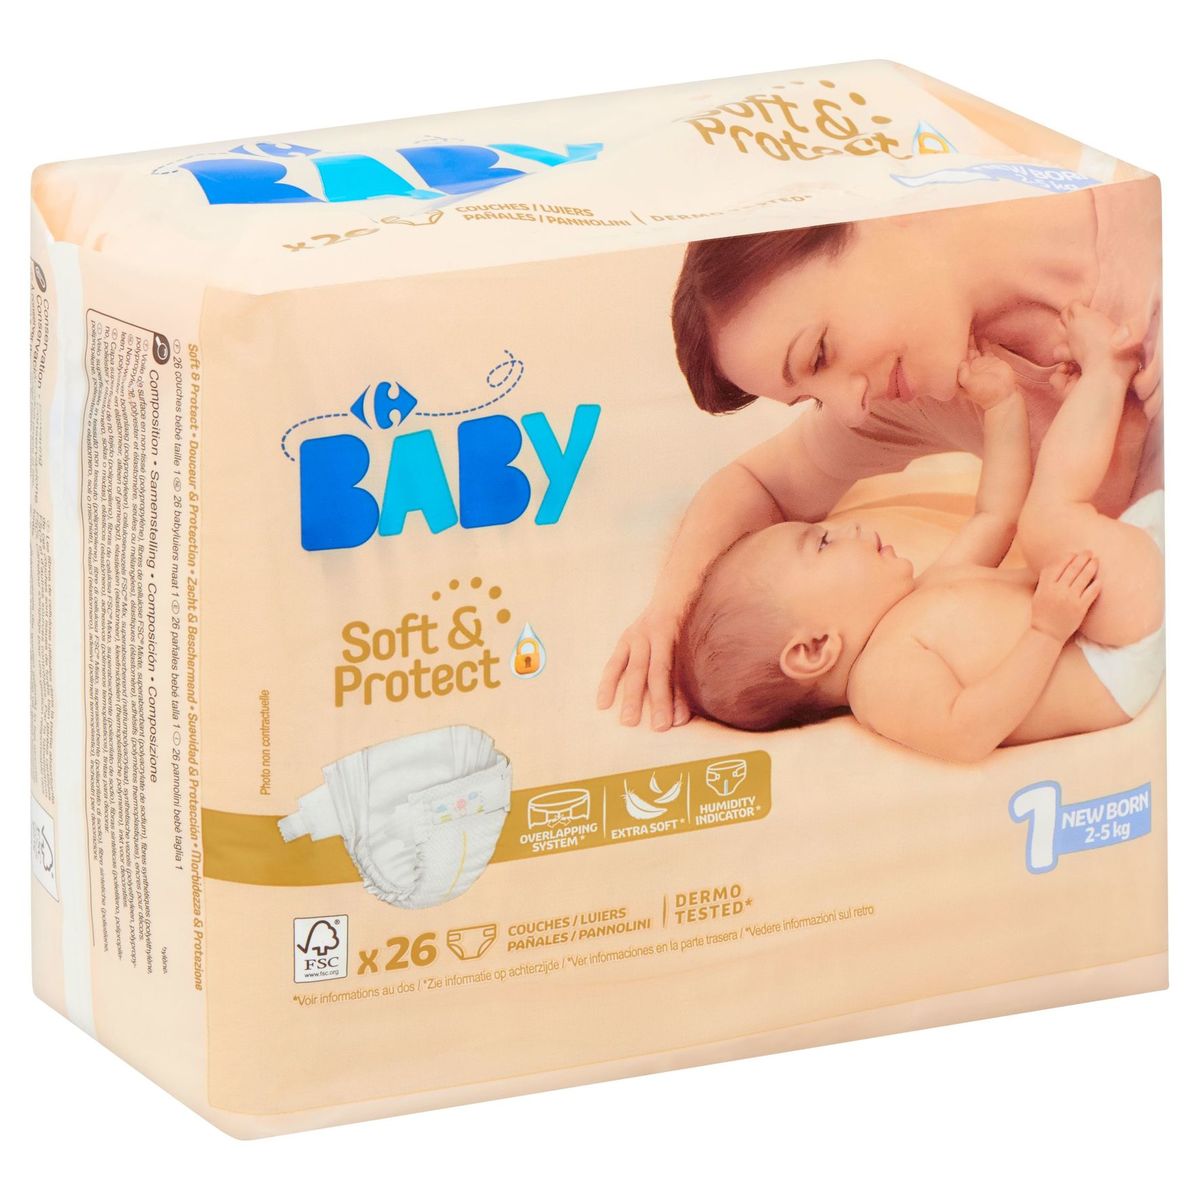 Carrefour Baby Soft & Protect 1 New Born 2-5 kg 26 Couches